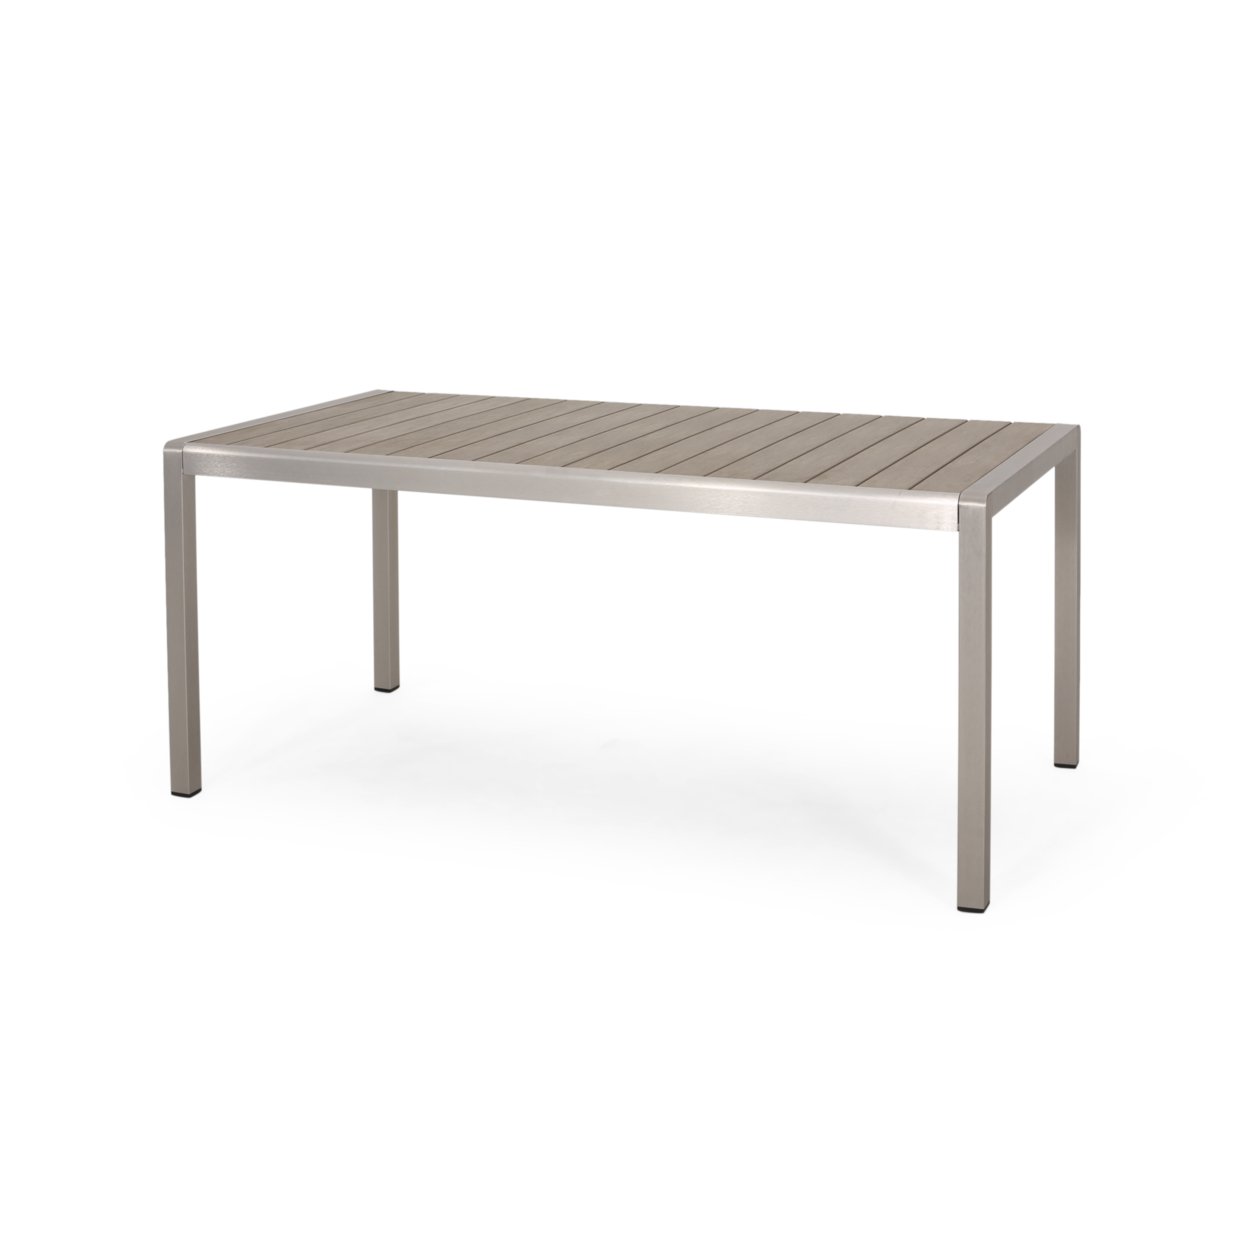 Hannah Outdoor Modern Aluminum Dining Table With Faux Wood Table Top - Natural Finish + Silver